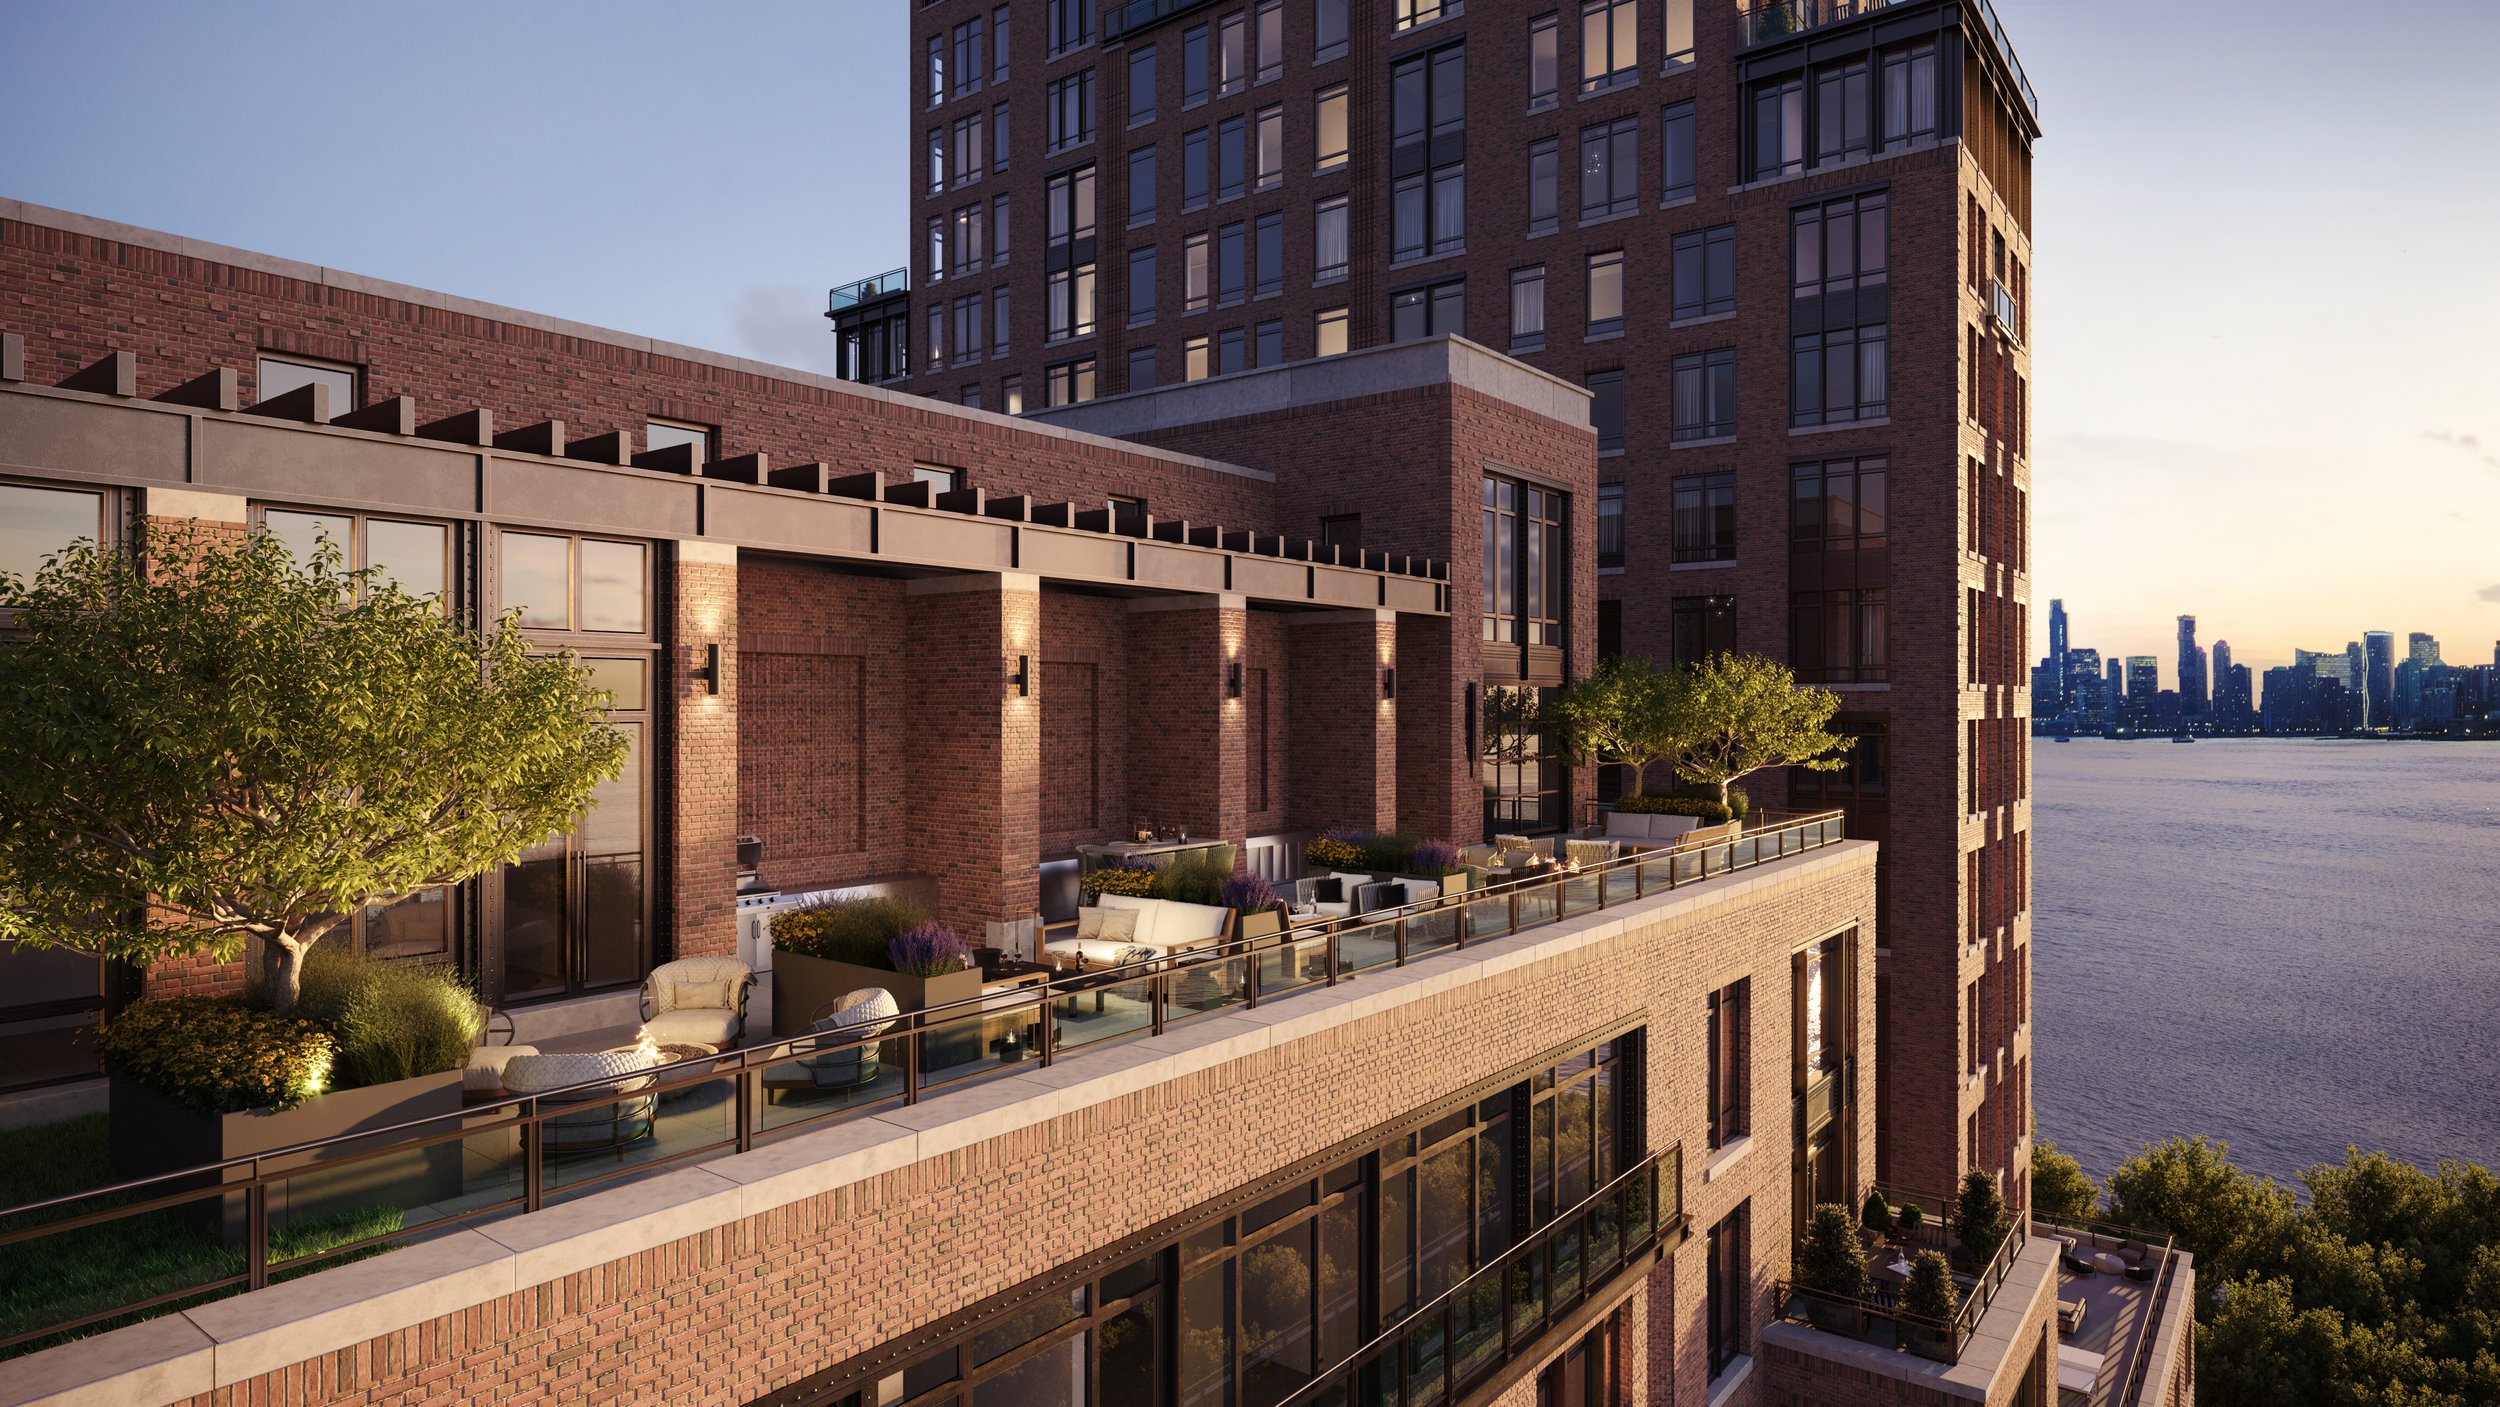  The Cortland’s intricate façade features a mix of limestone, brick, and metal detailing and uses over one million hand-made and hand-laid bricks. "We have drawn on West Chelsea’s historic mix of robust brick and industrial architecture infusing The 